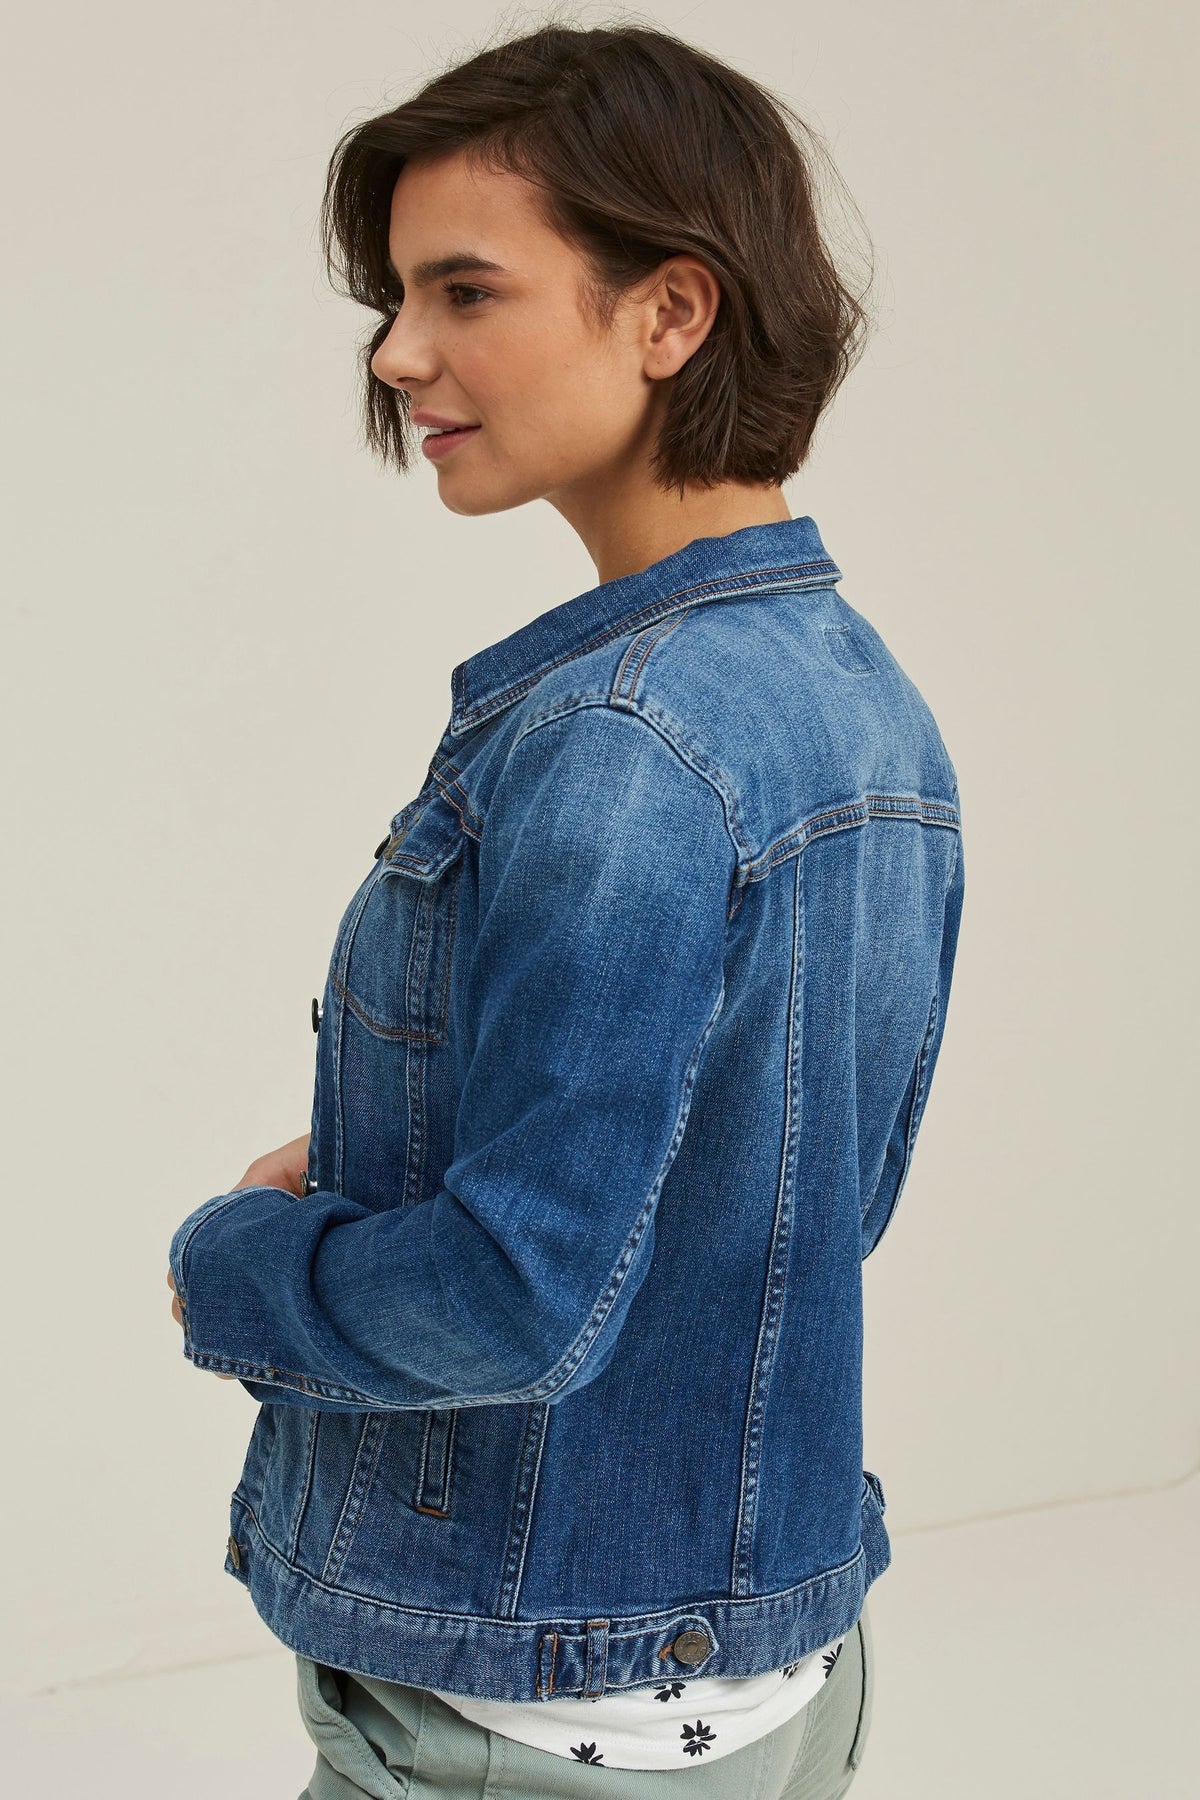 Blue denim jacket with ruffle detailing on the front, worn by a young woman with dark hair.